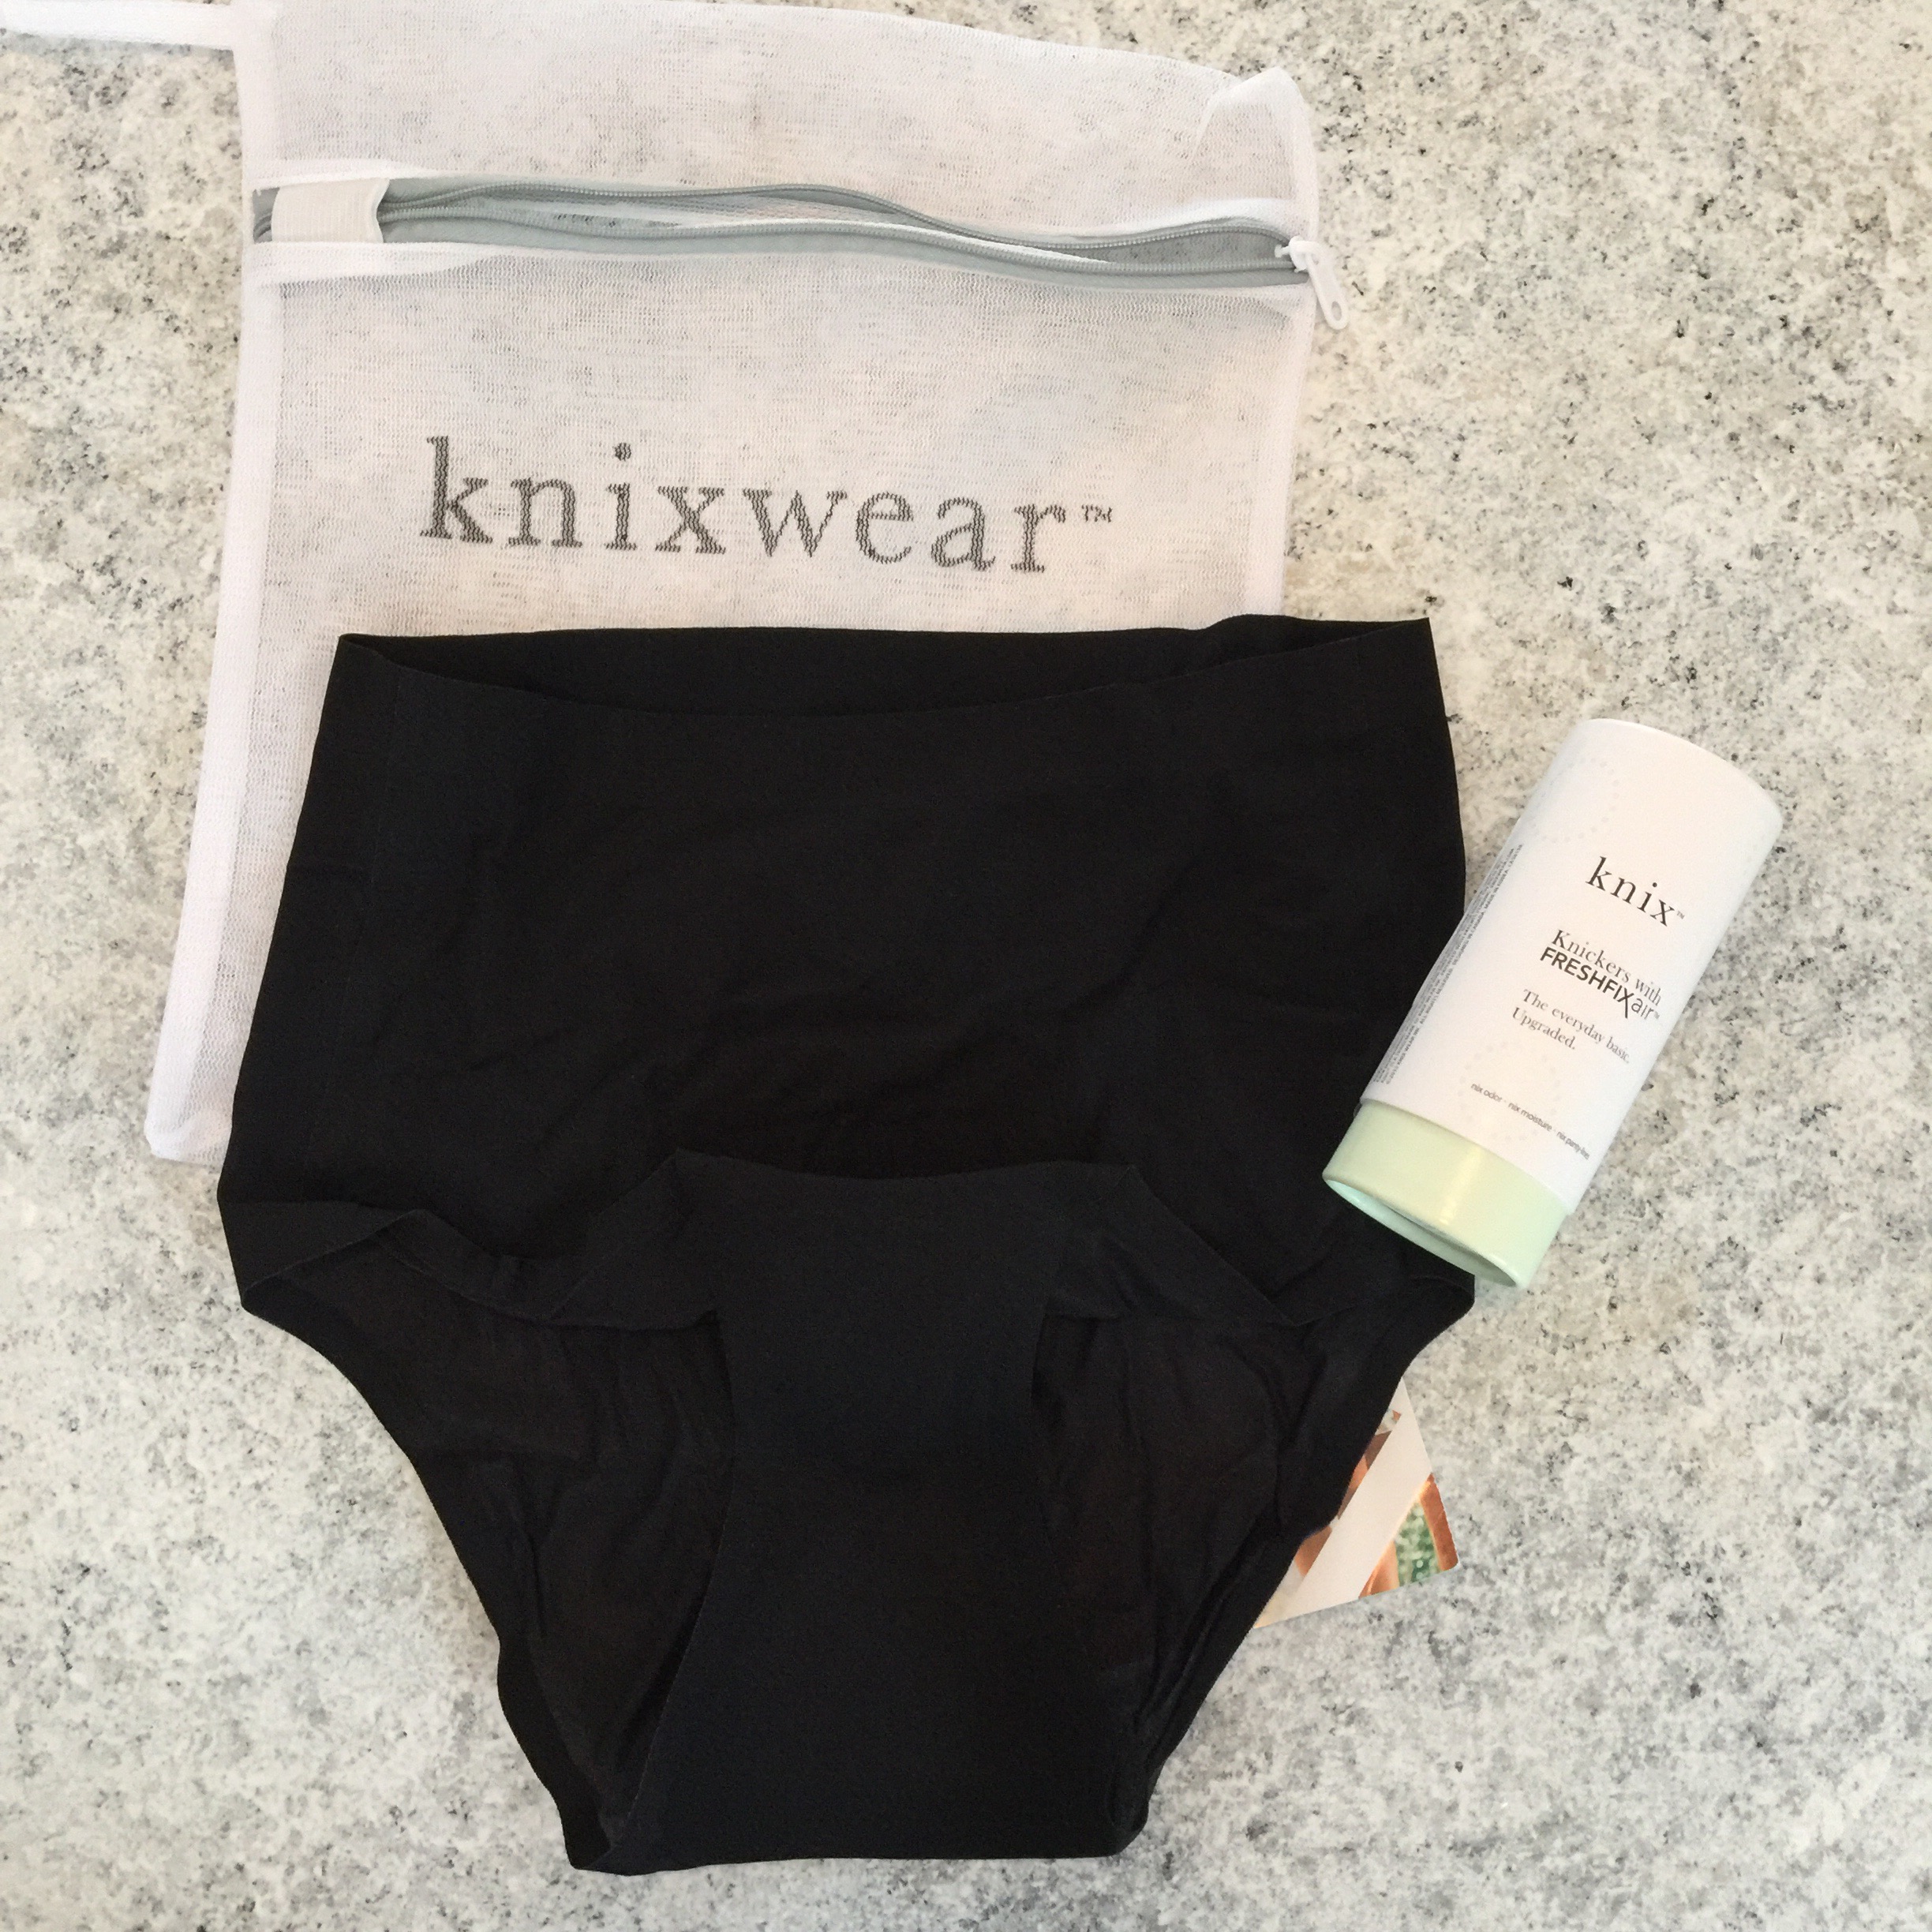 Knixwear Underwear, Designed For And Tested By Athletic Women